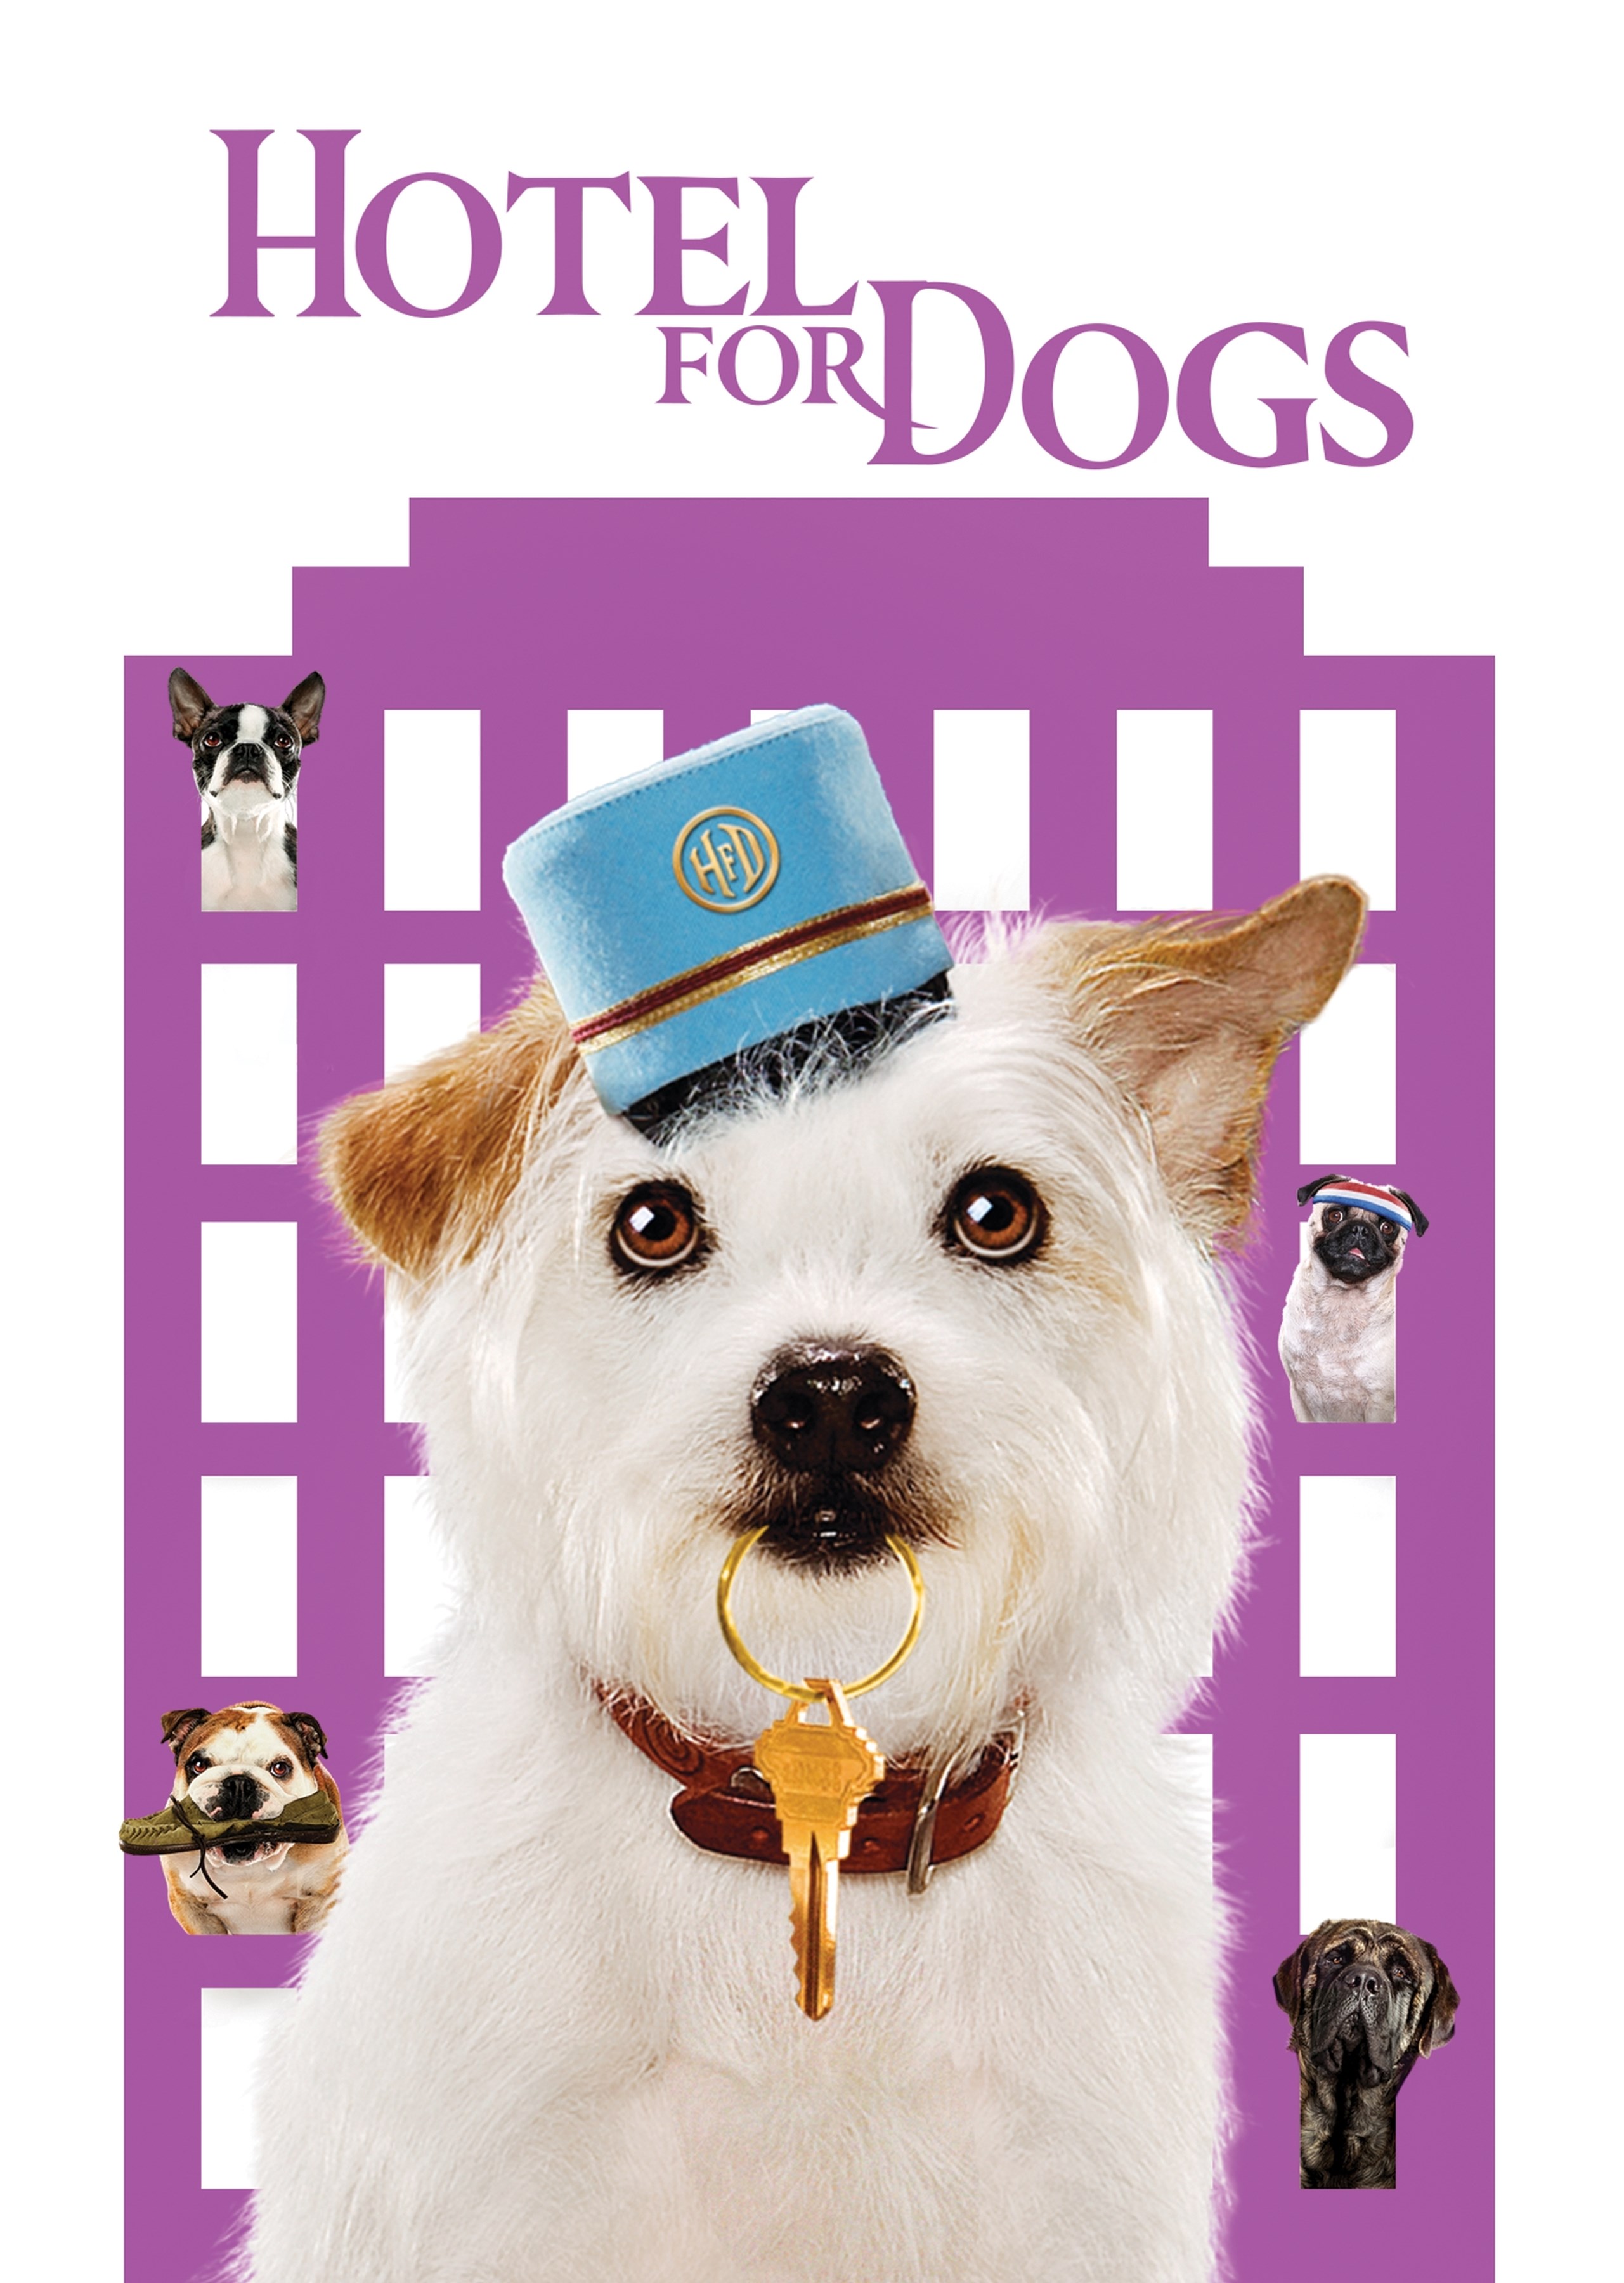 Hotel for Dogs [DVD] [2009] - Best Buy